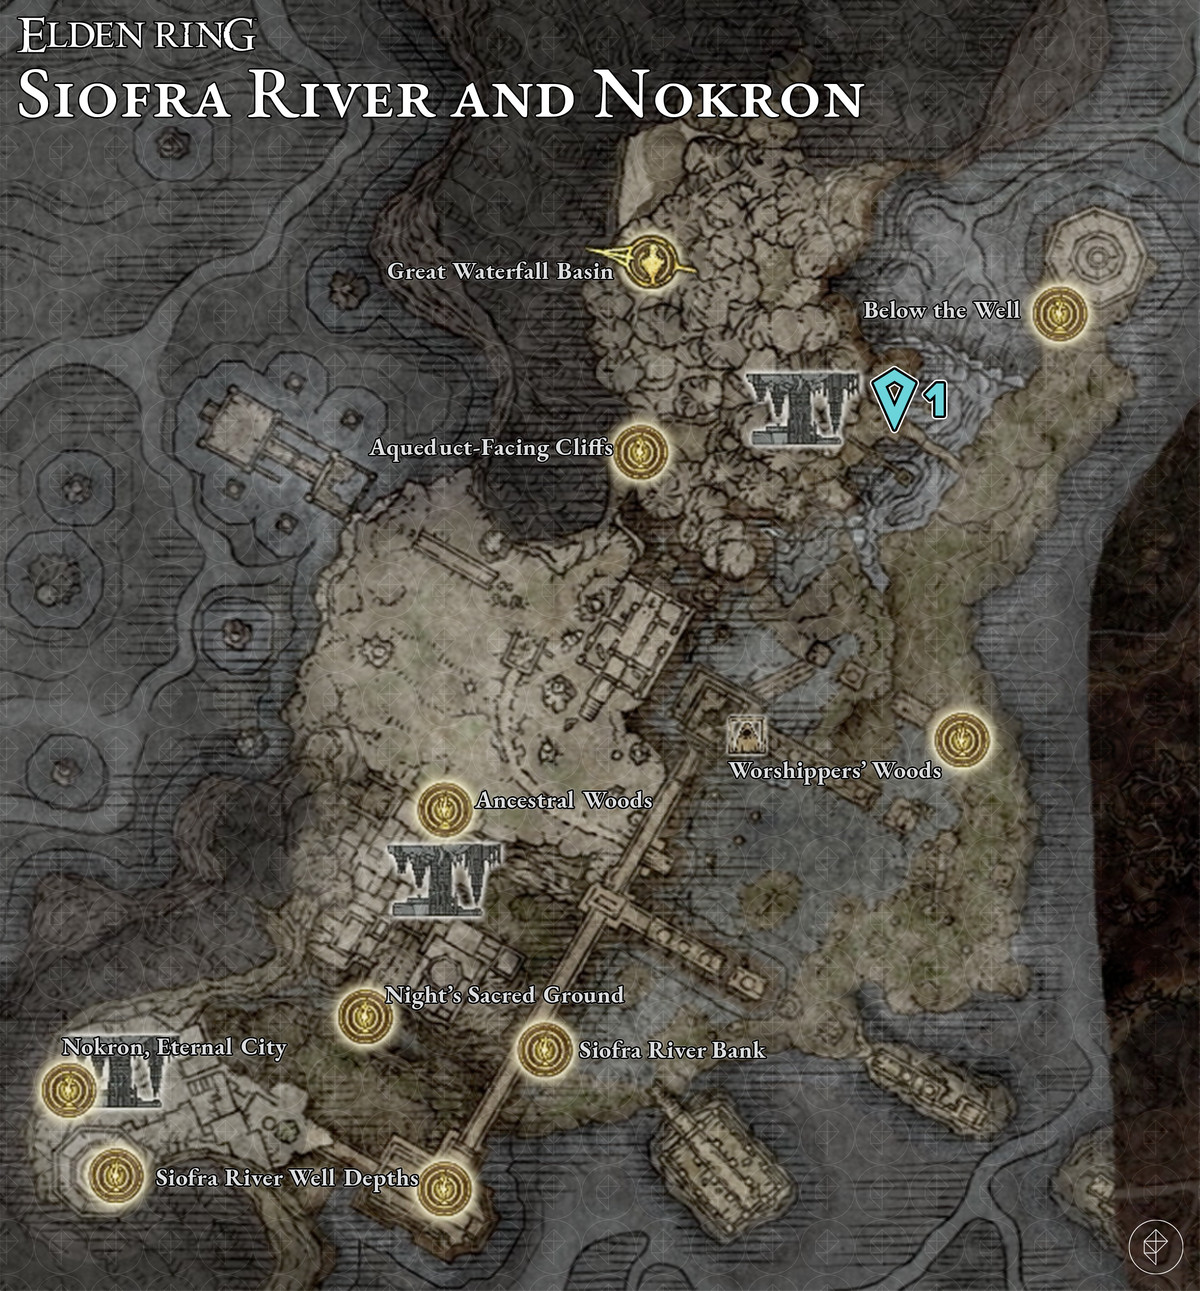 Map showing the Siofra and Nokron, Eternal City Golden Seed locations.